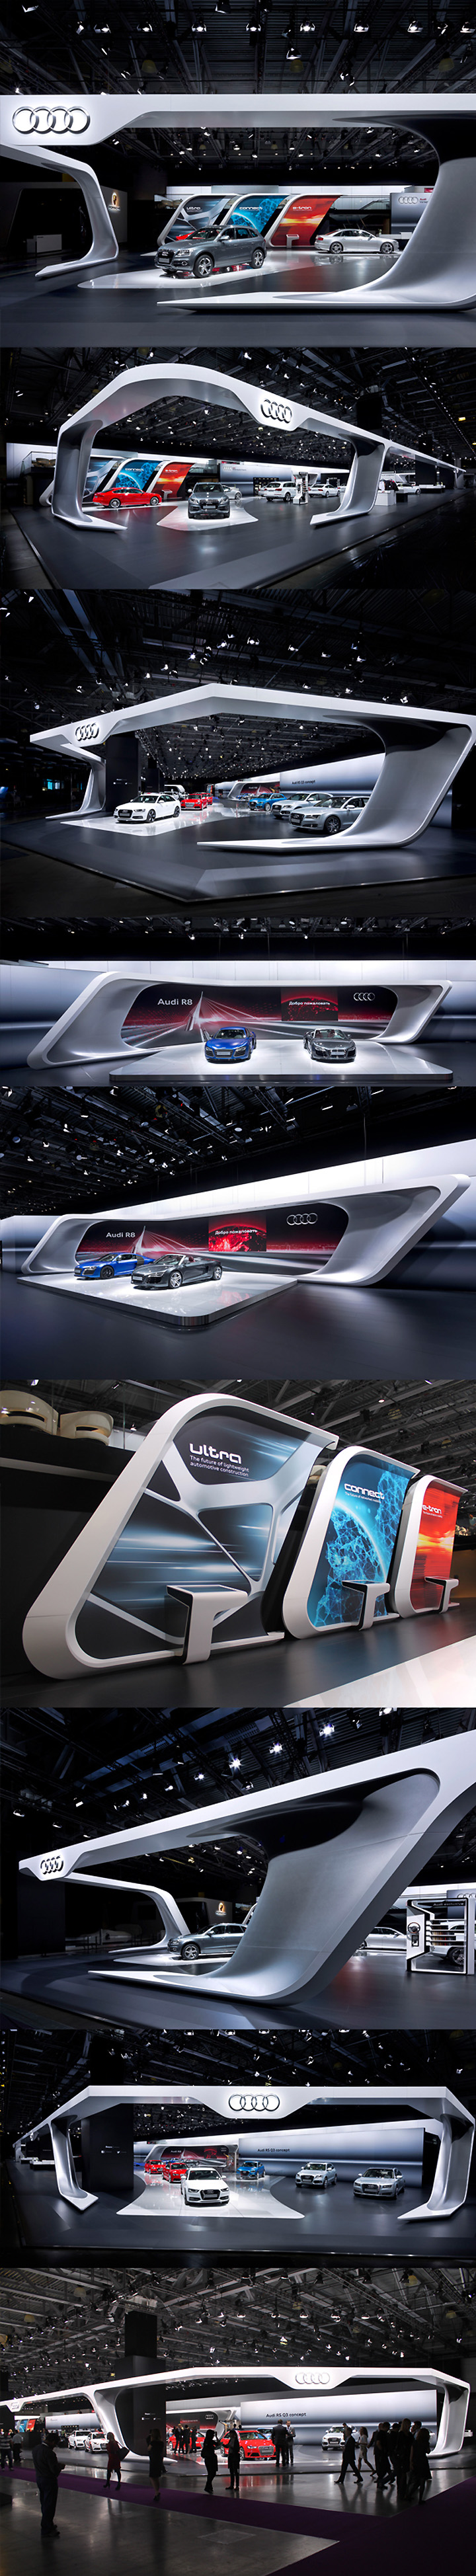 Audi Exhibition 2012 By Malte Schweers Moscow